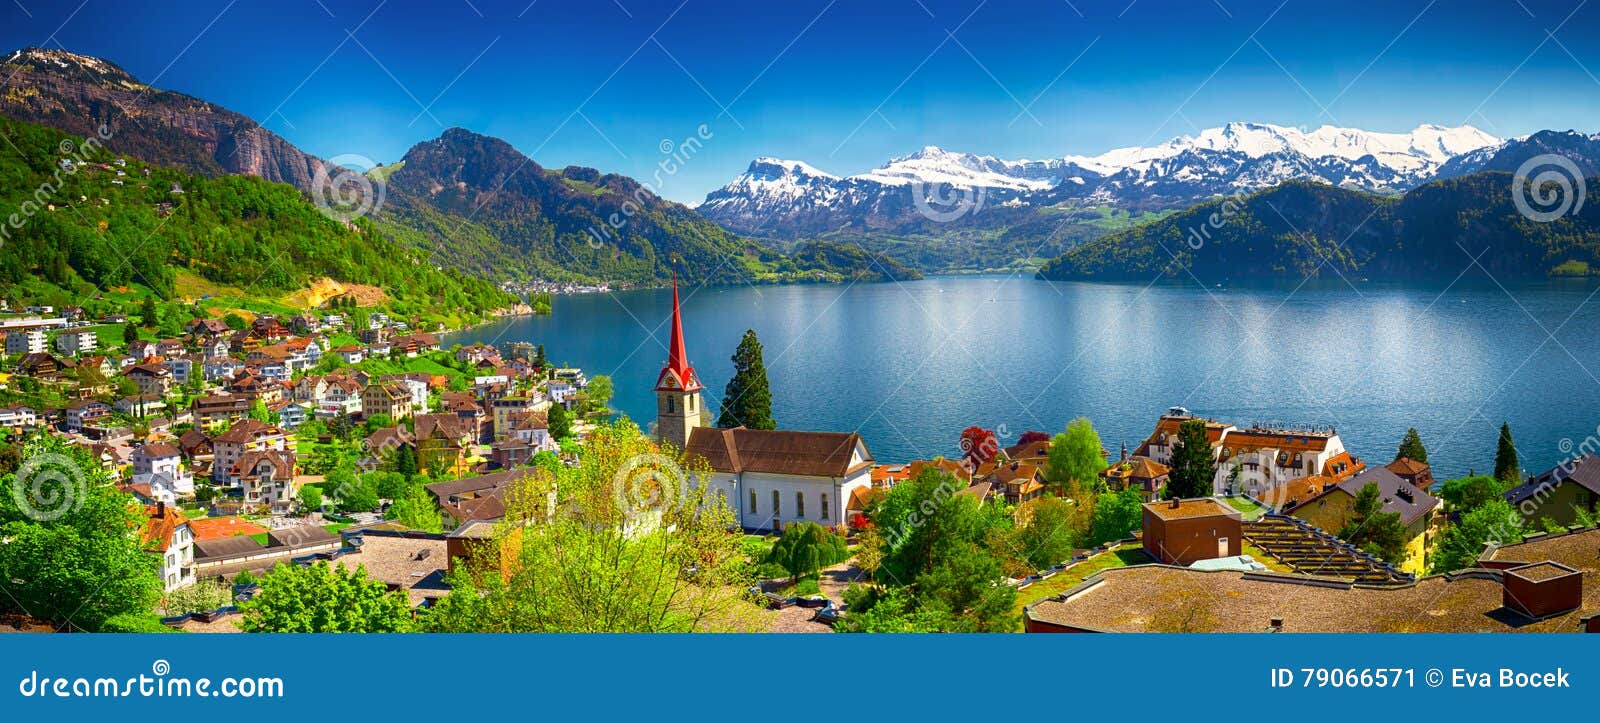 village weggis and lake lucerne surrounded by swiss alps